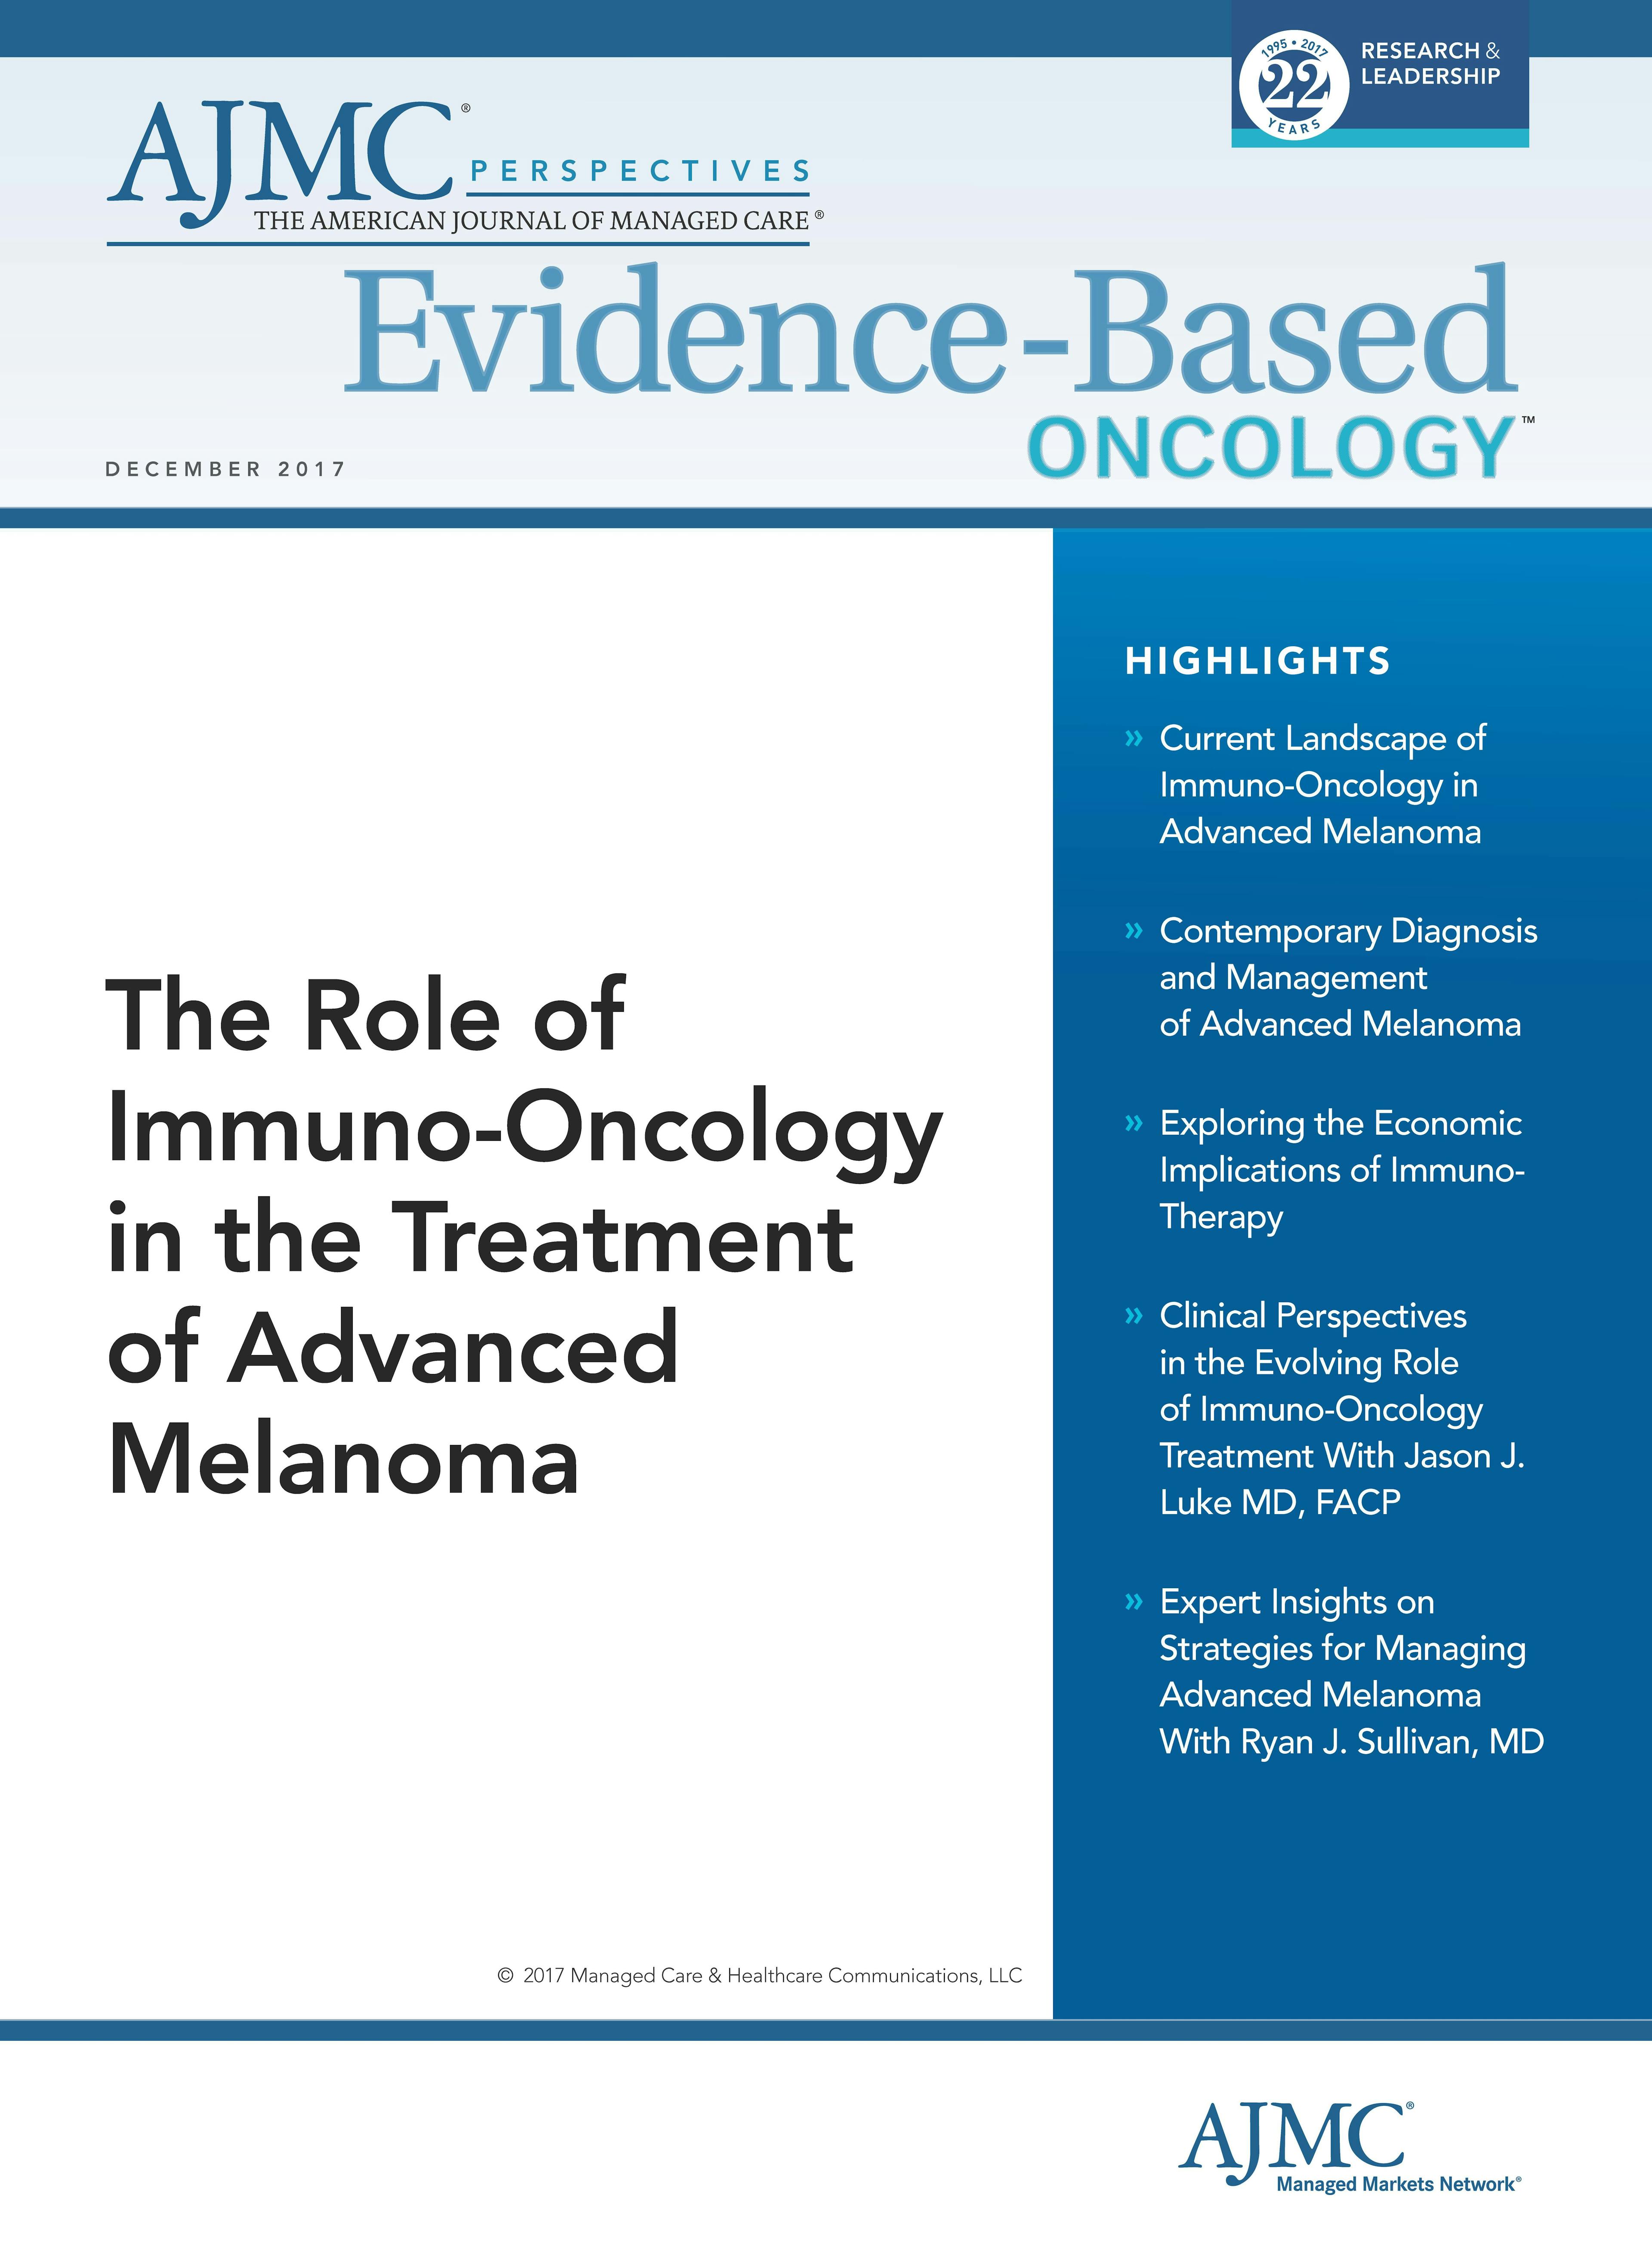 The Role of Immuno-Oncology in the Treatment of Advanced Melanoma